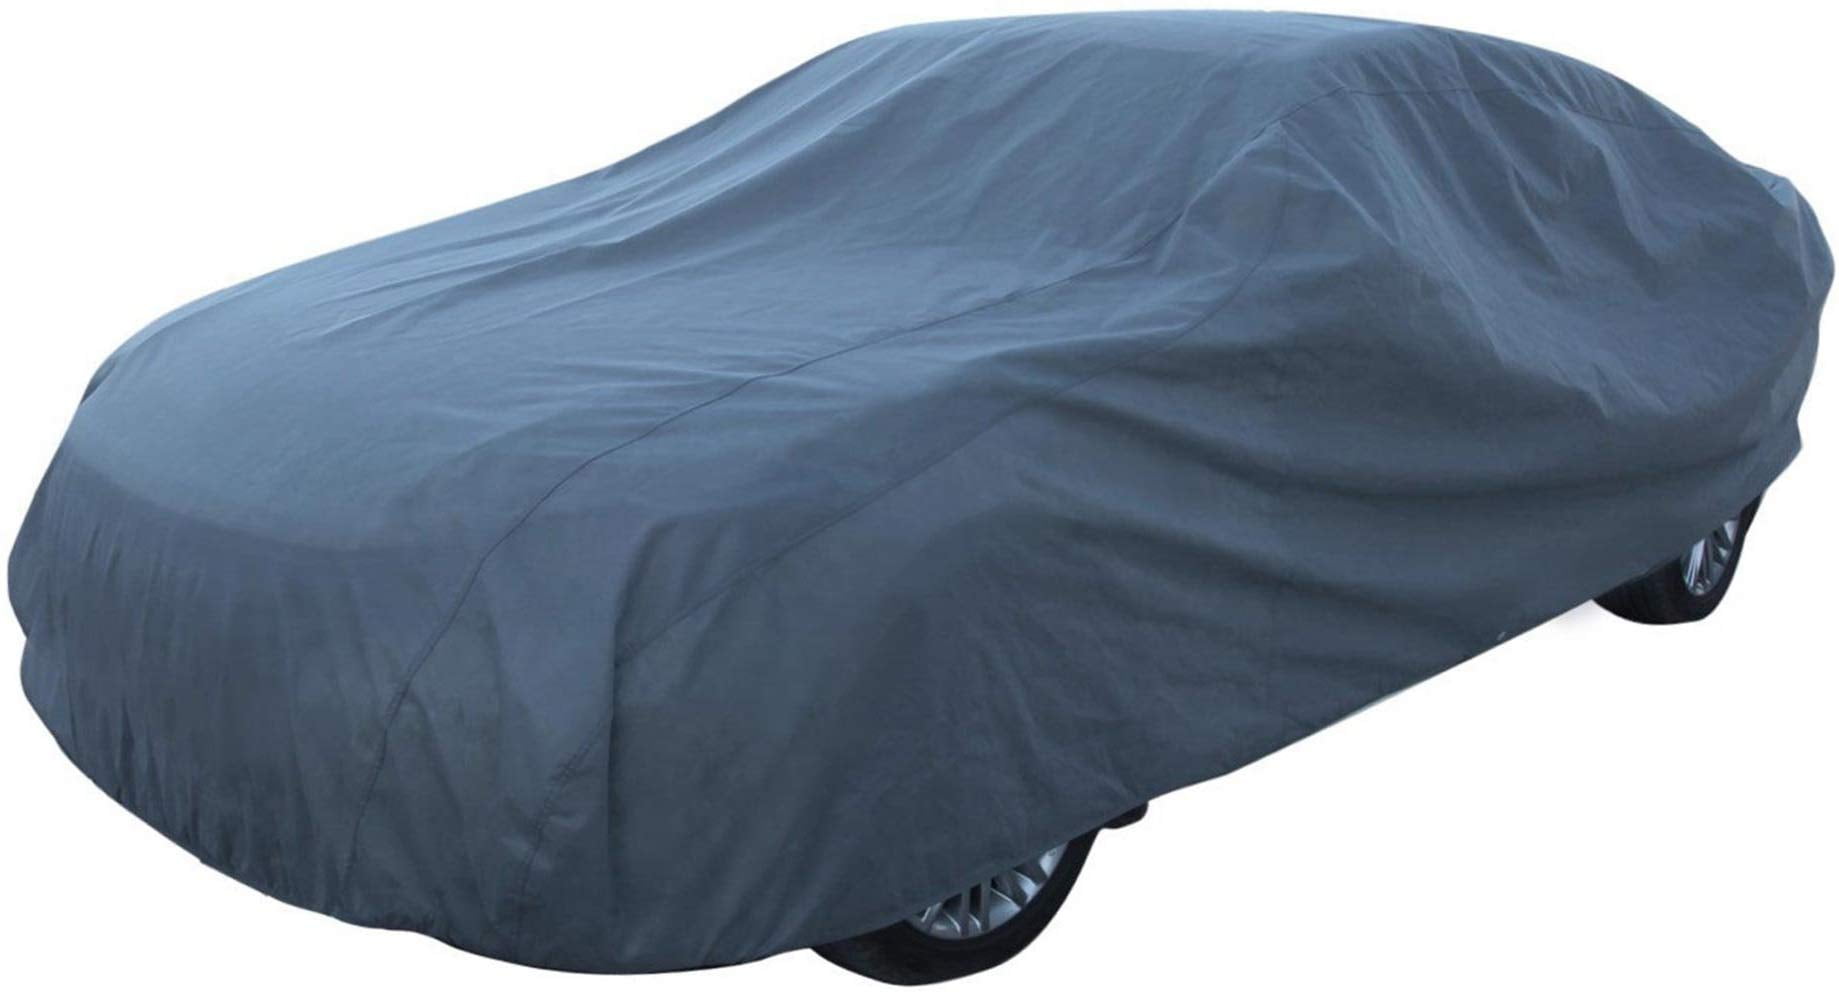 Leader Accessories Premium Car Cover 100% Waterproof Fit Cars Length Up to 200 Breathable Outdoor Indoor Black Sedan Cover 